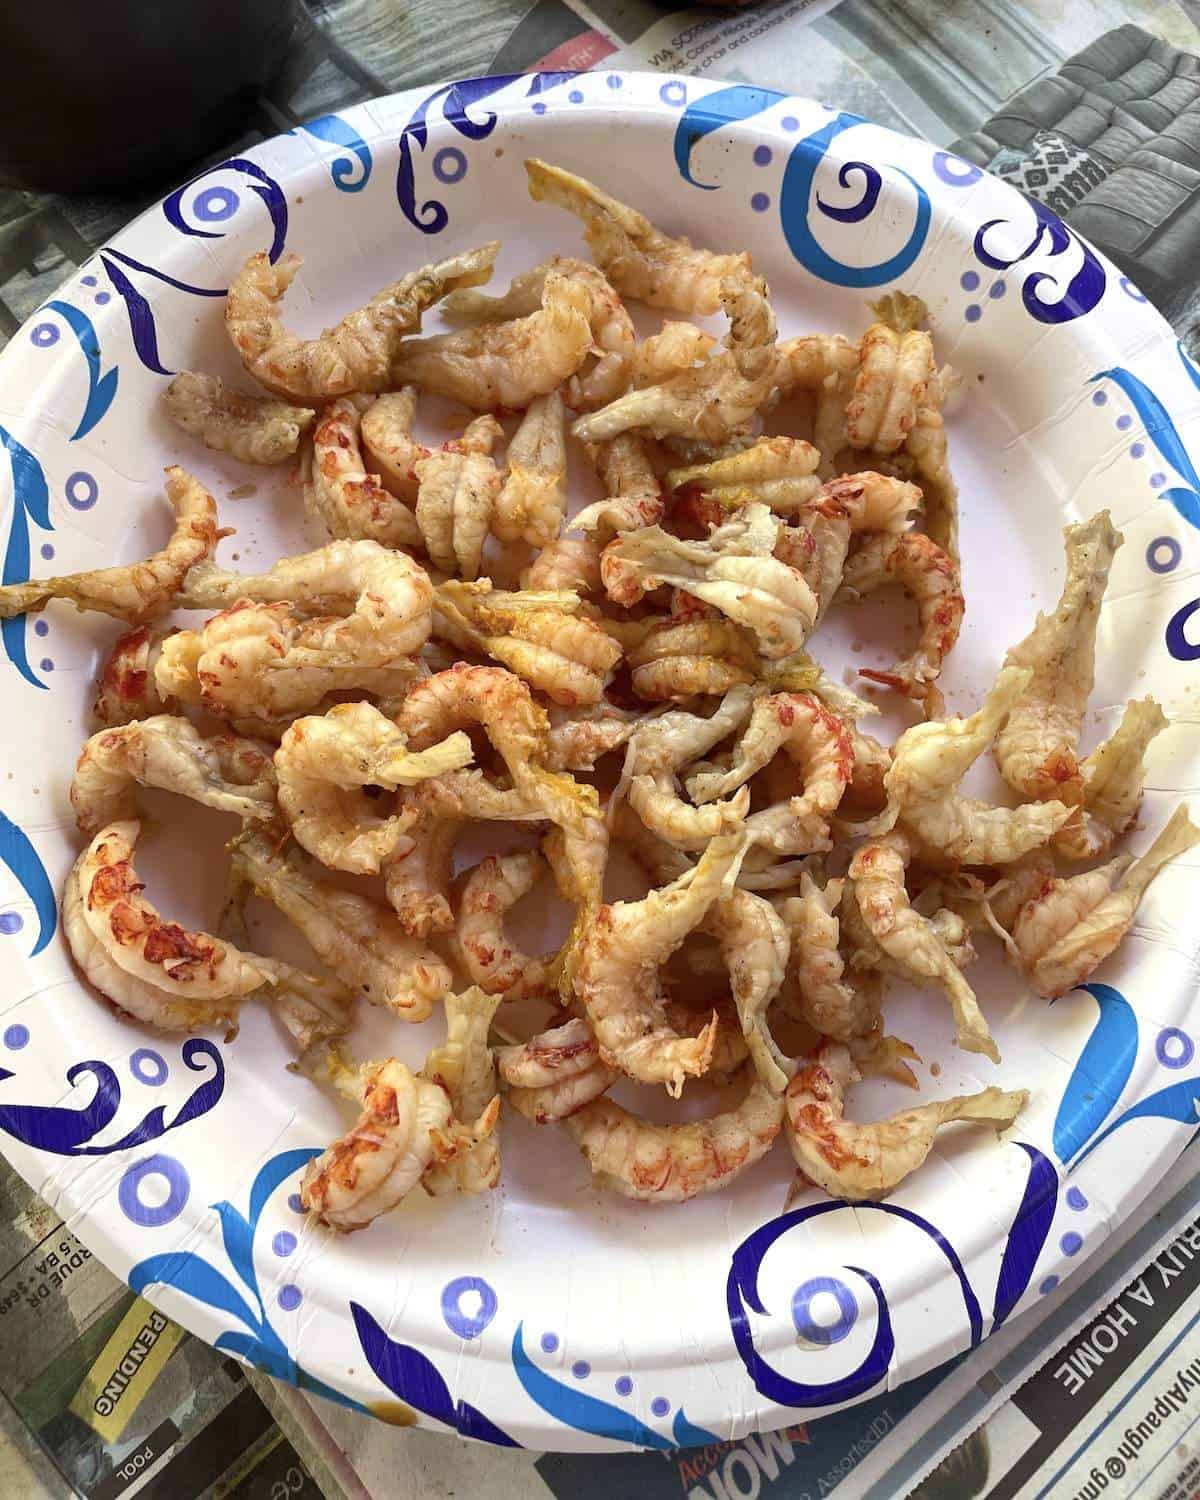 A paper plate of leftover peeled crawfish tails from a crawfish boil.